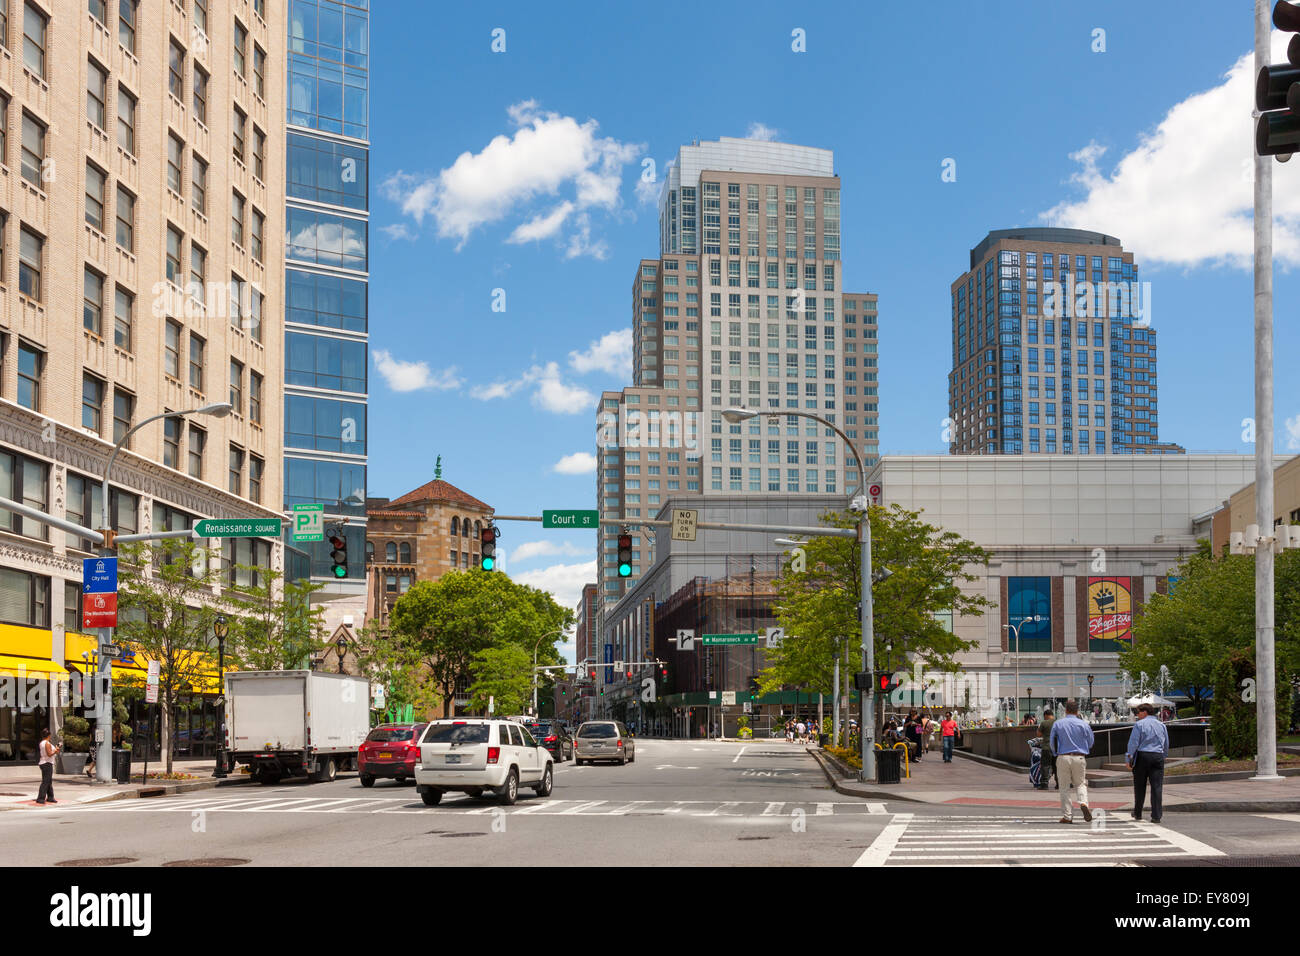 A view down Main Street towards City Center in downtown White Plains, New York. Stock Photo